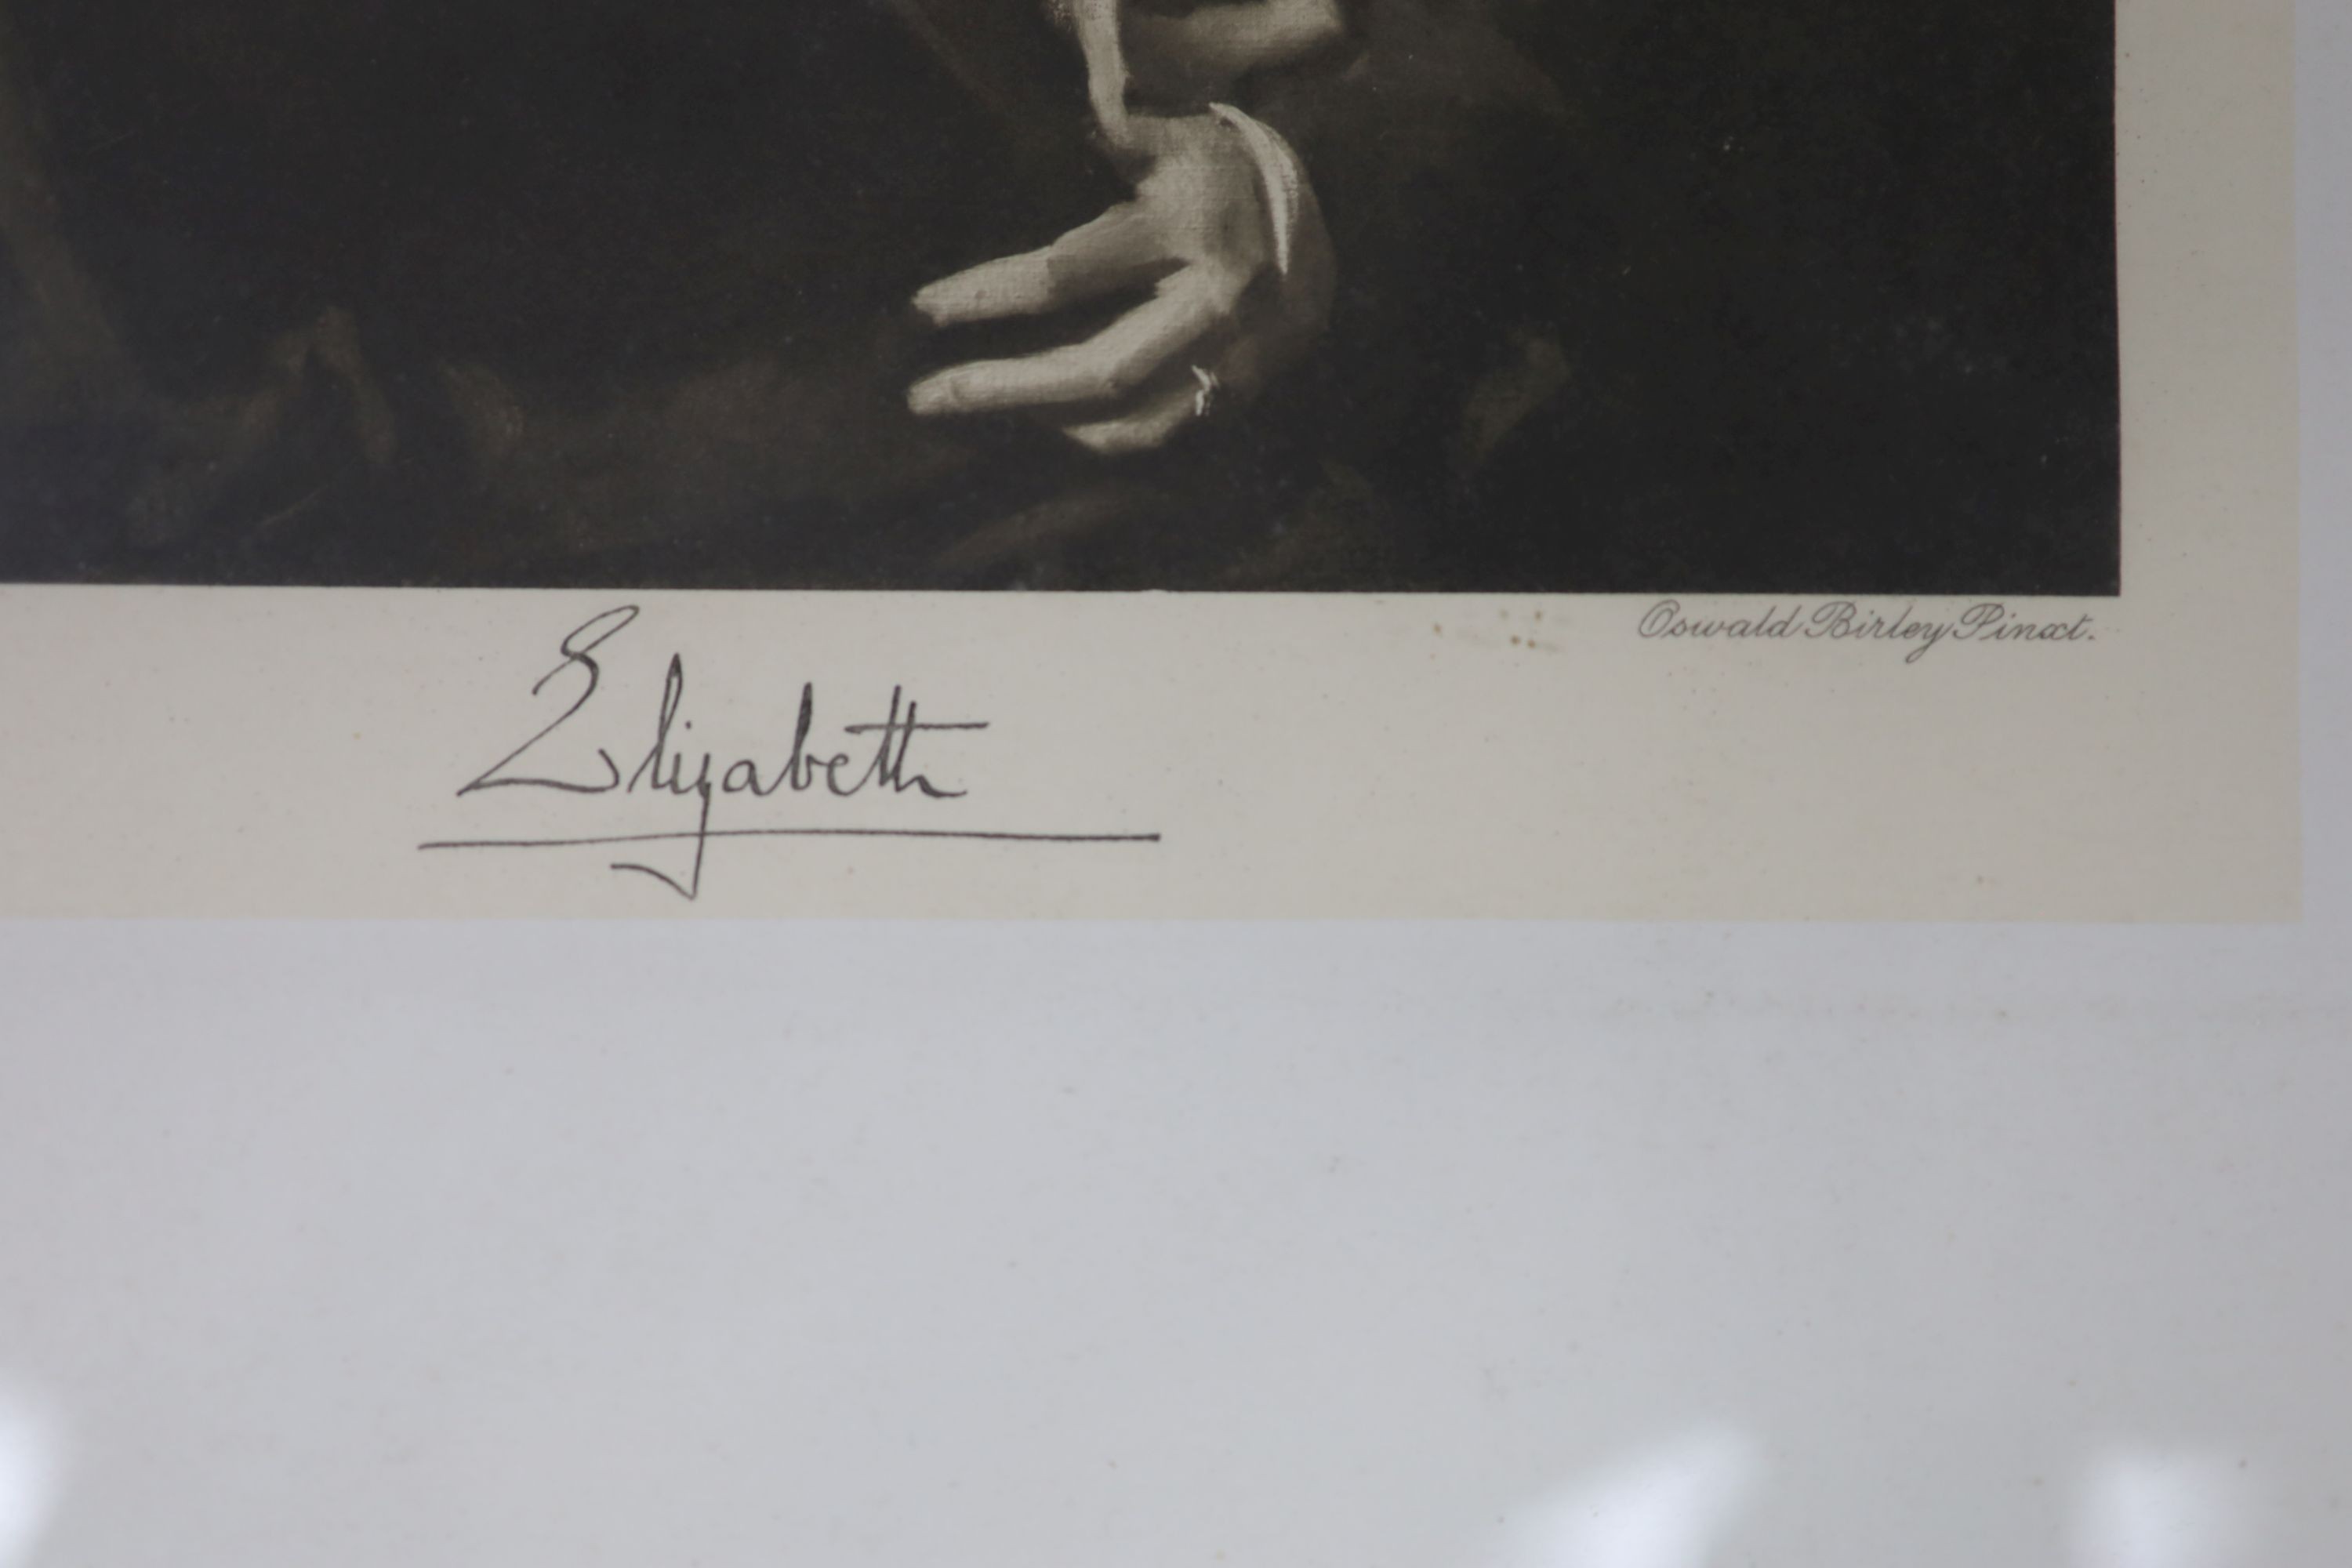 After Sir Oswald Birley. A photograph of Elizabeth Duchess of York, later Queen Elizabeth, signed